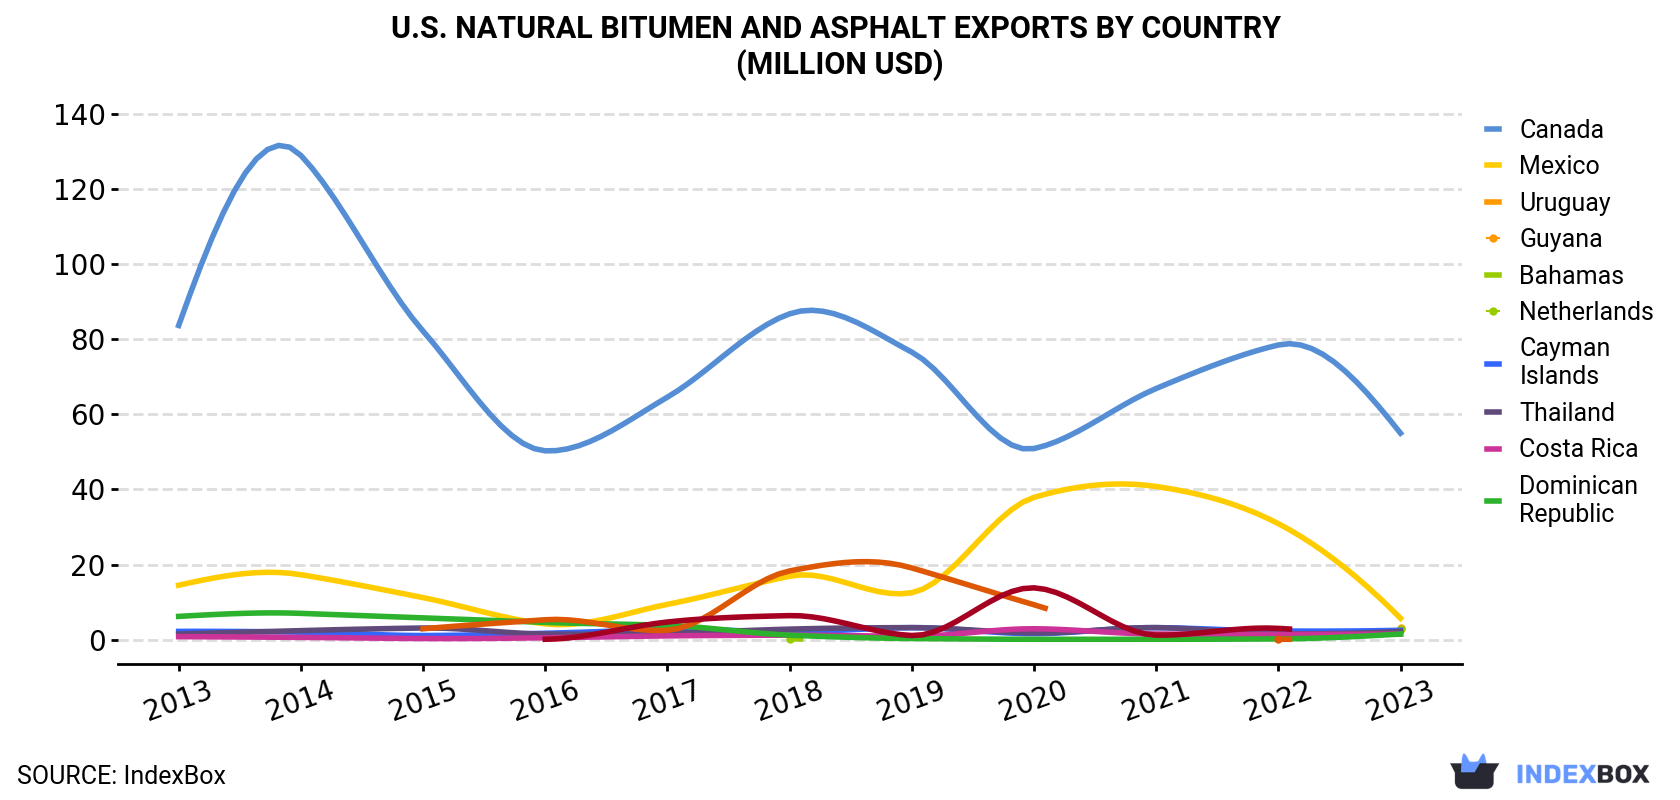 U.S. Natural Bitumen and Asphalt Exports By Country (Million USD)